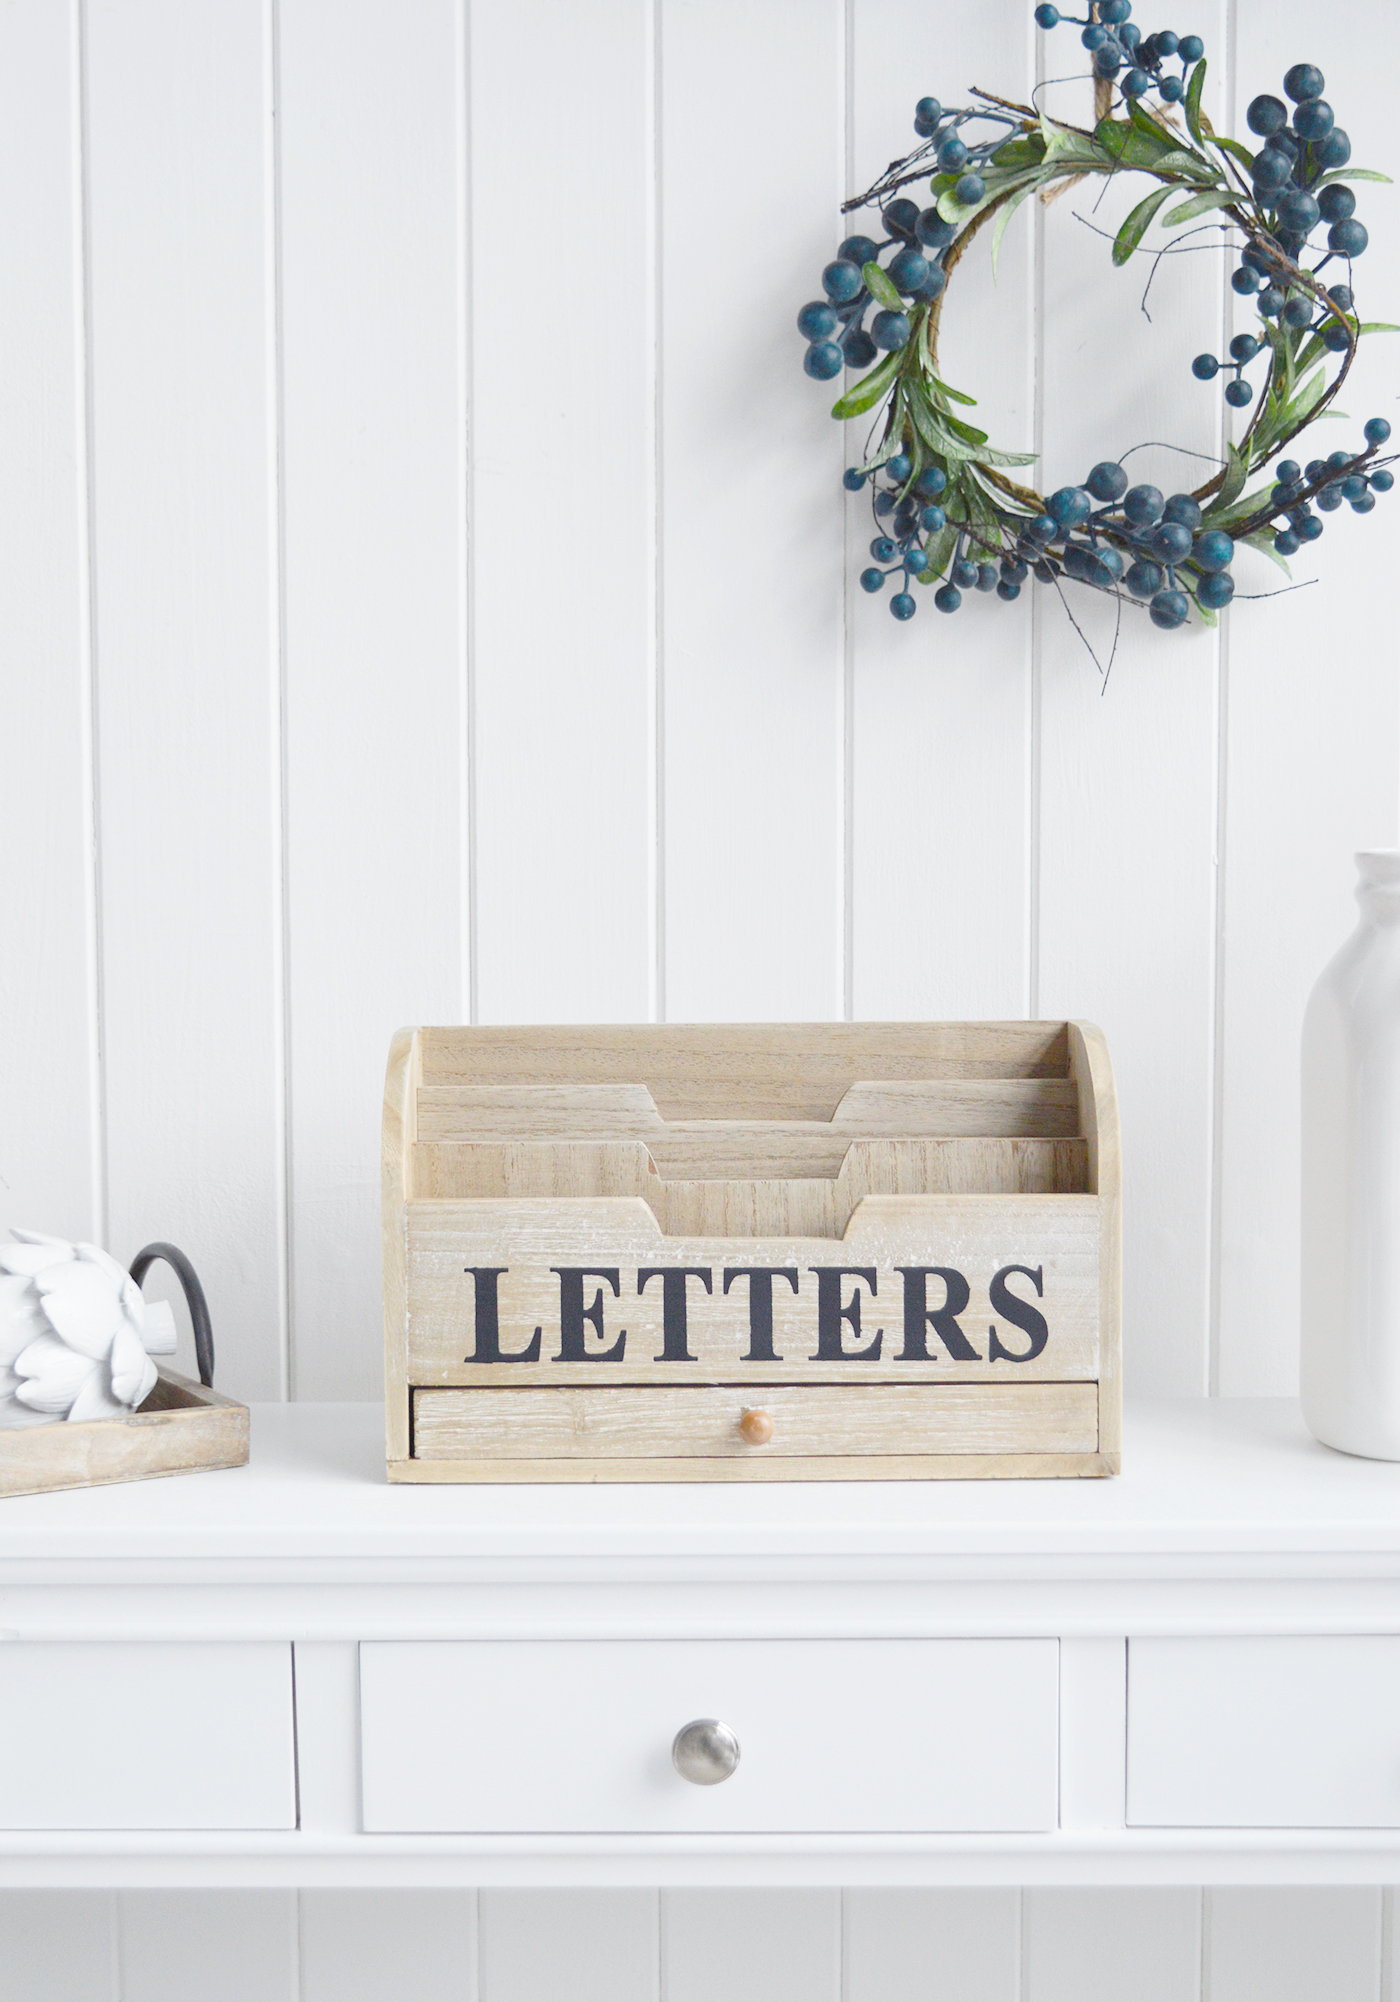 New England Home Interiors Coastal and Country   Furniture and accessories for the home. A  washed wood letter rack from The White Lighthouse